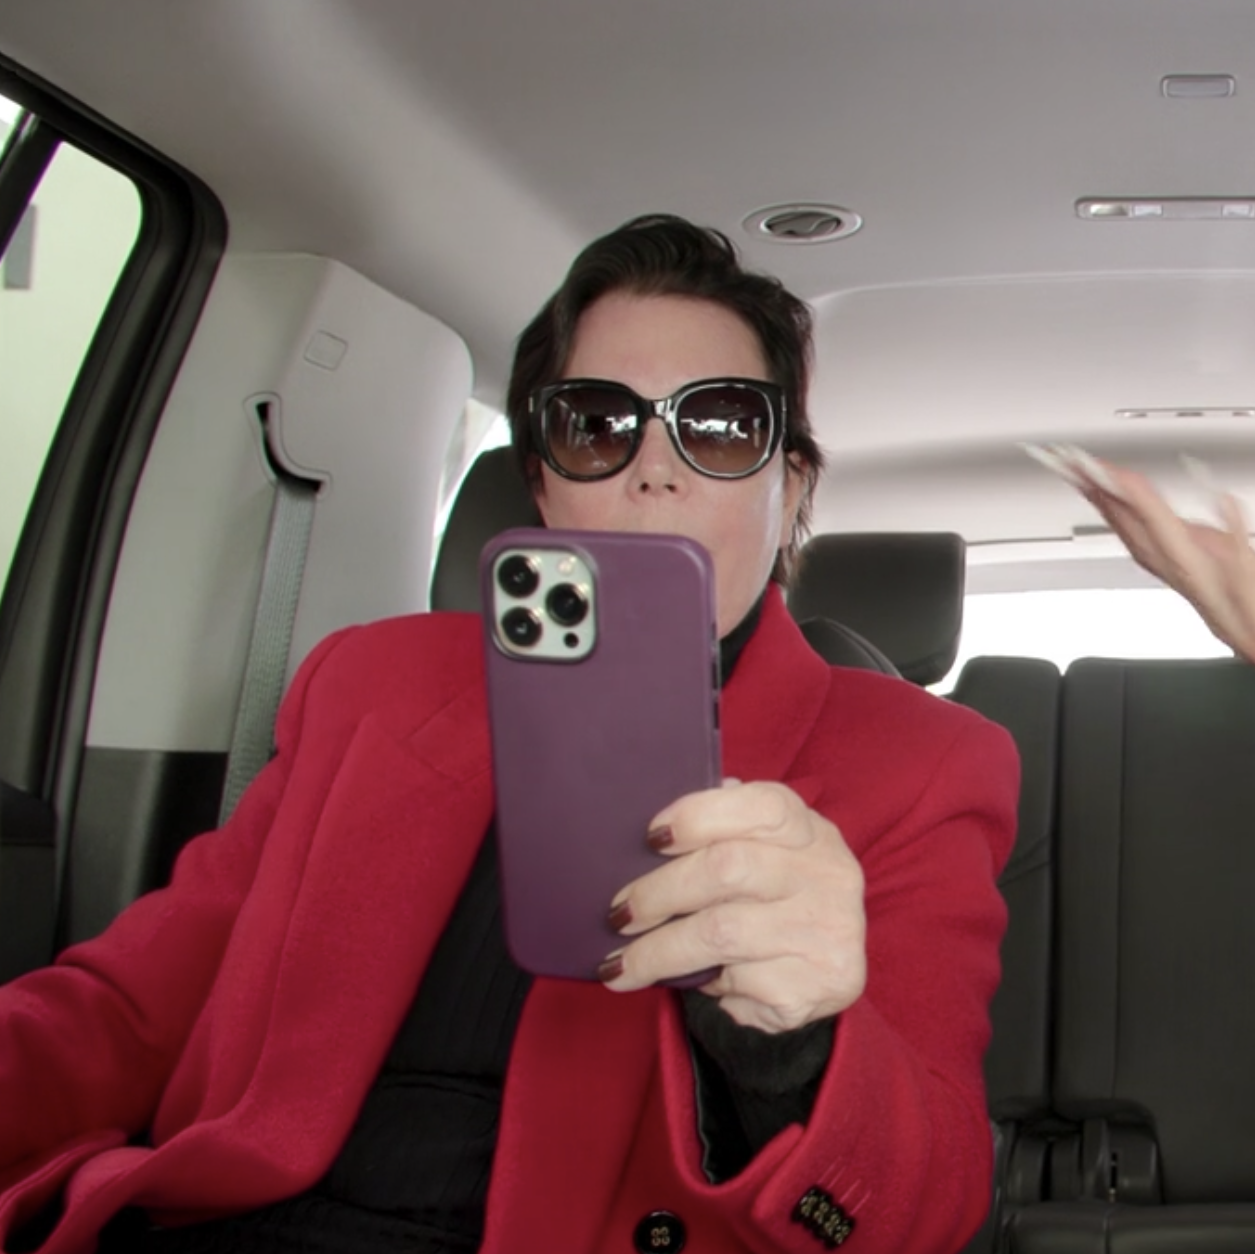 The Way Kris Jenner Spoke to a Driver Has People Pissed